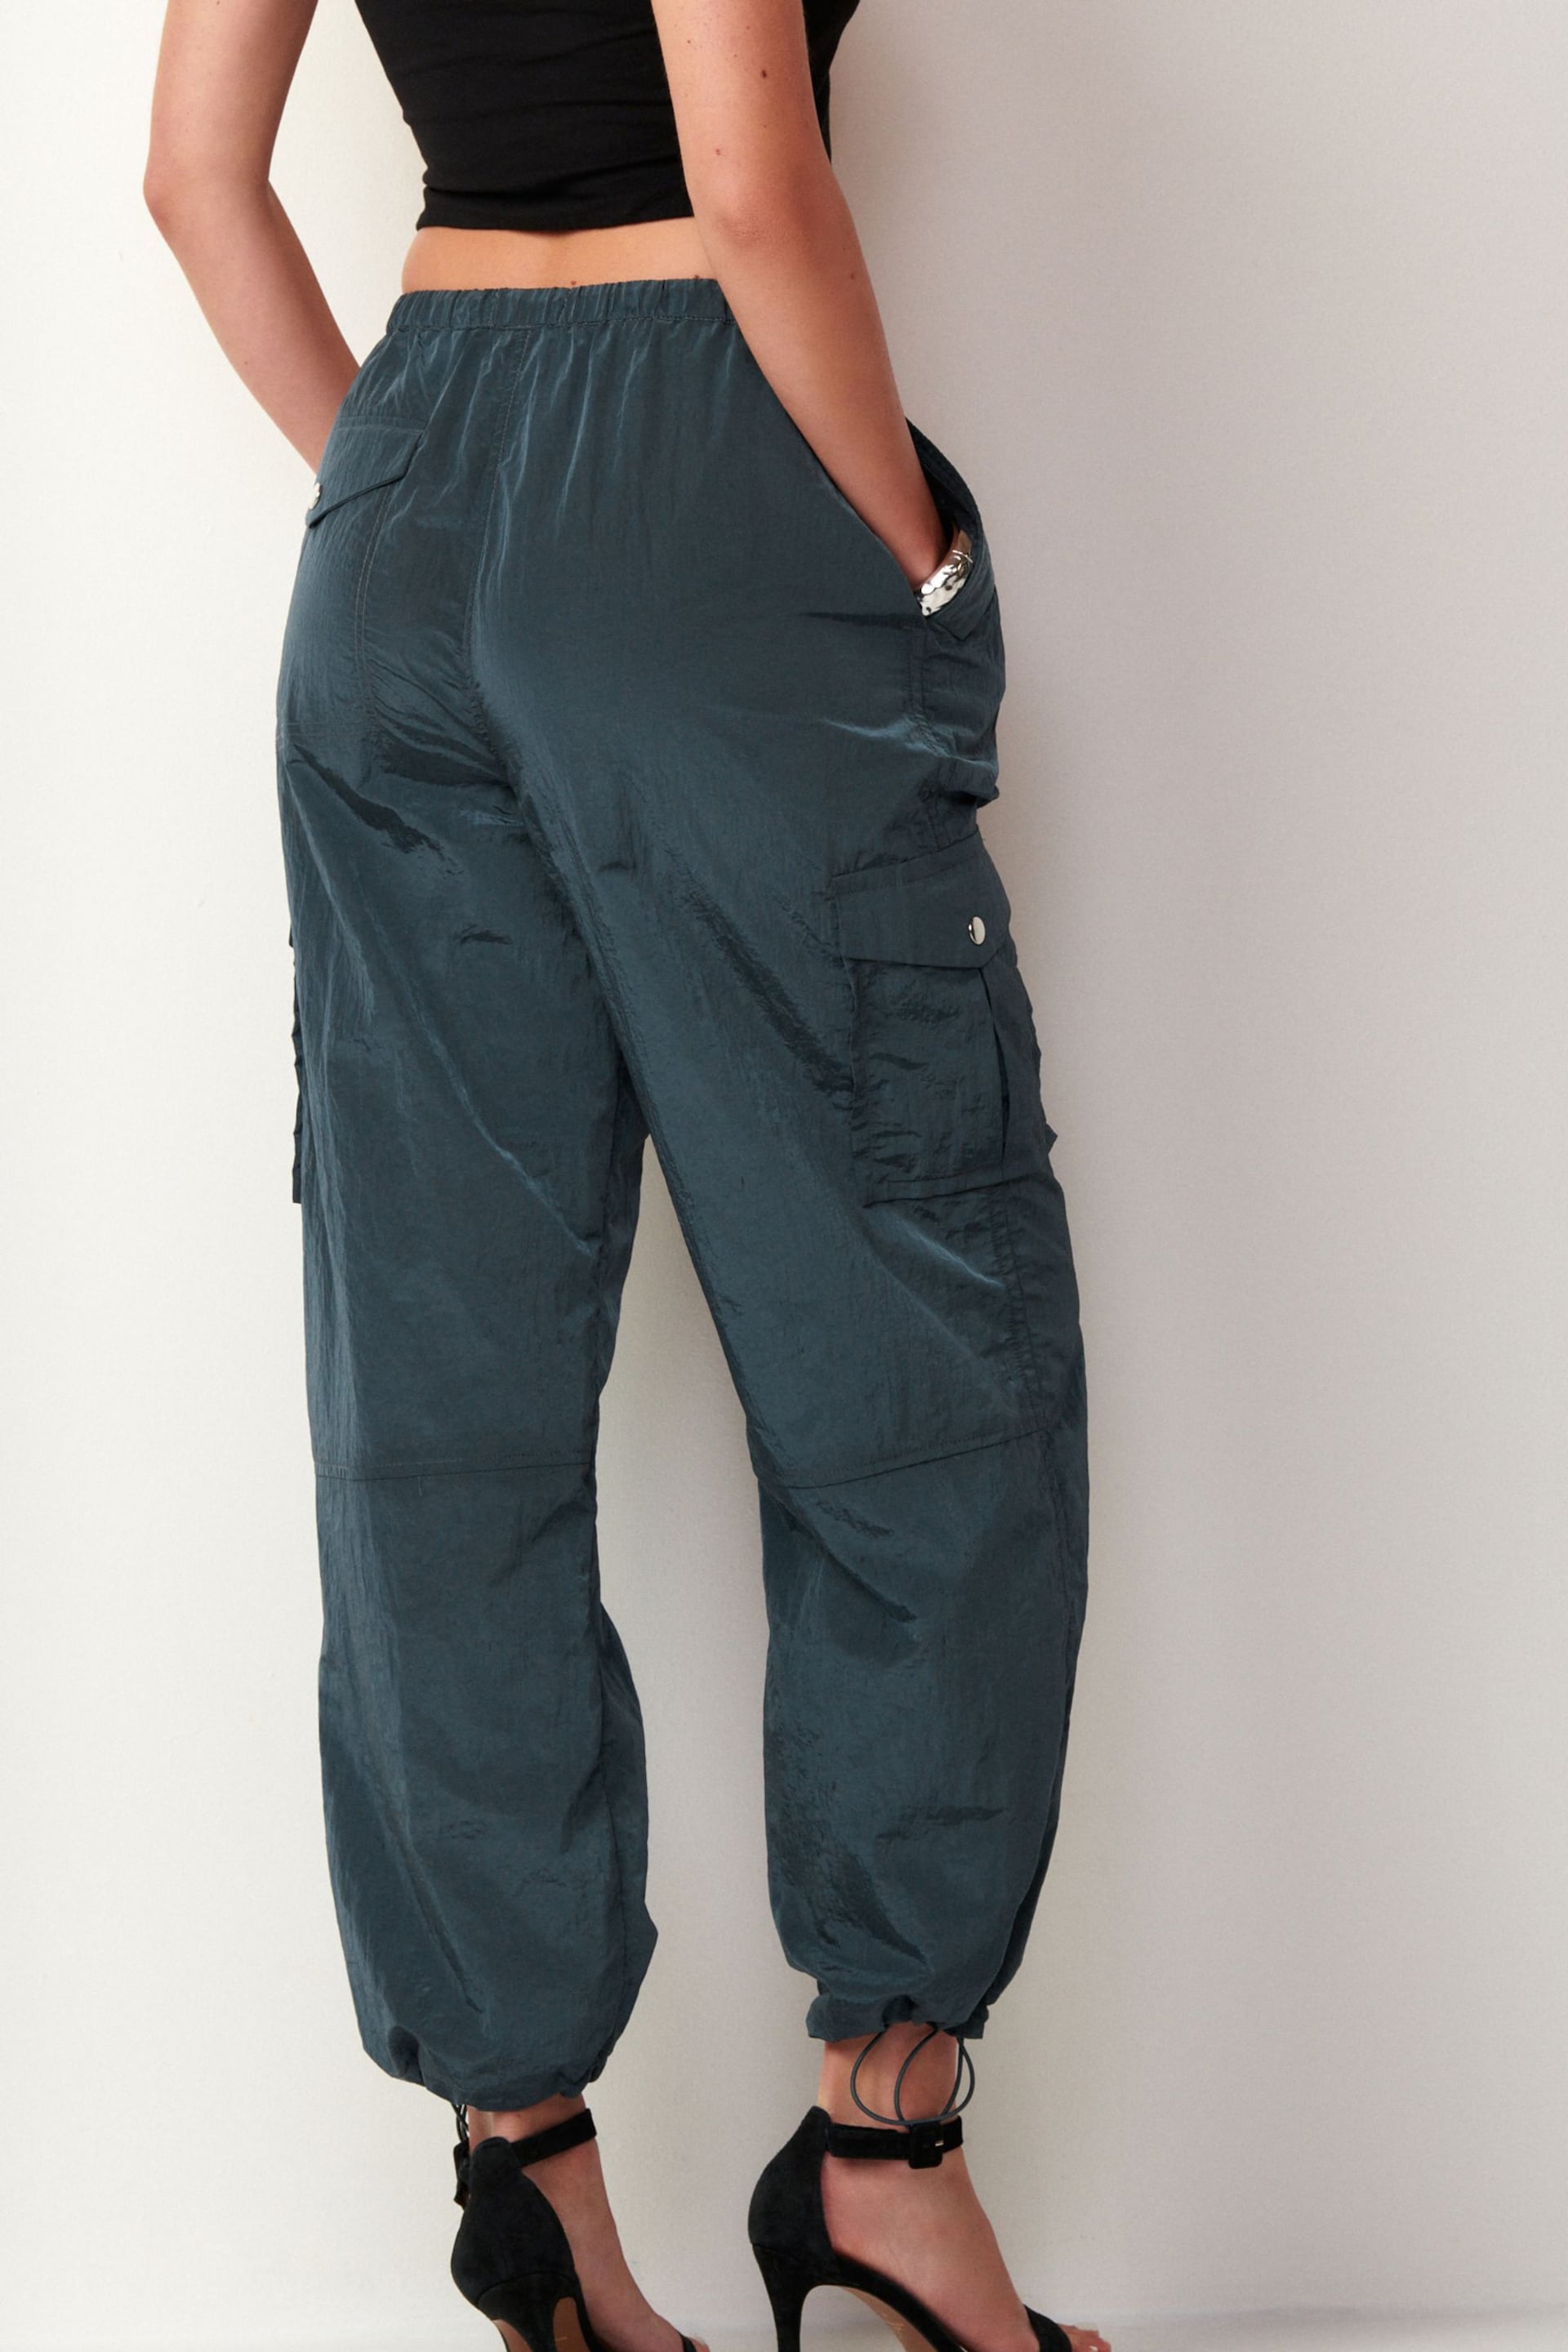 Grey Parachute Pull On Cargo Trousers - Image 3 of 7